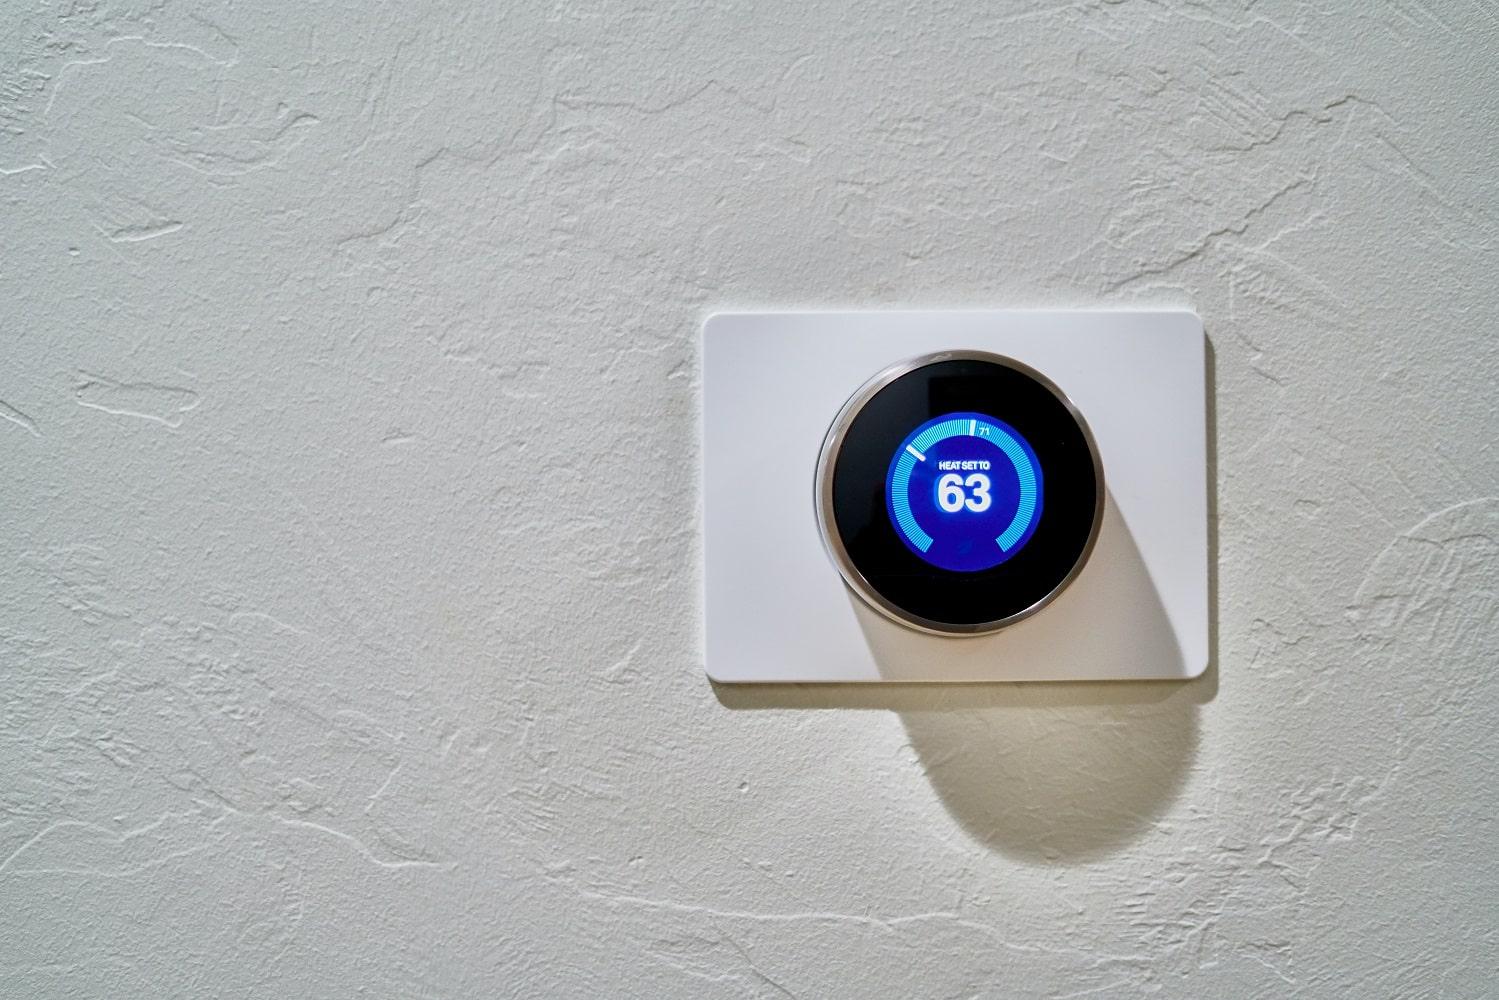 Installing programmable thermostats